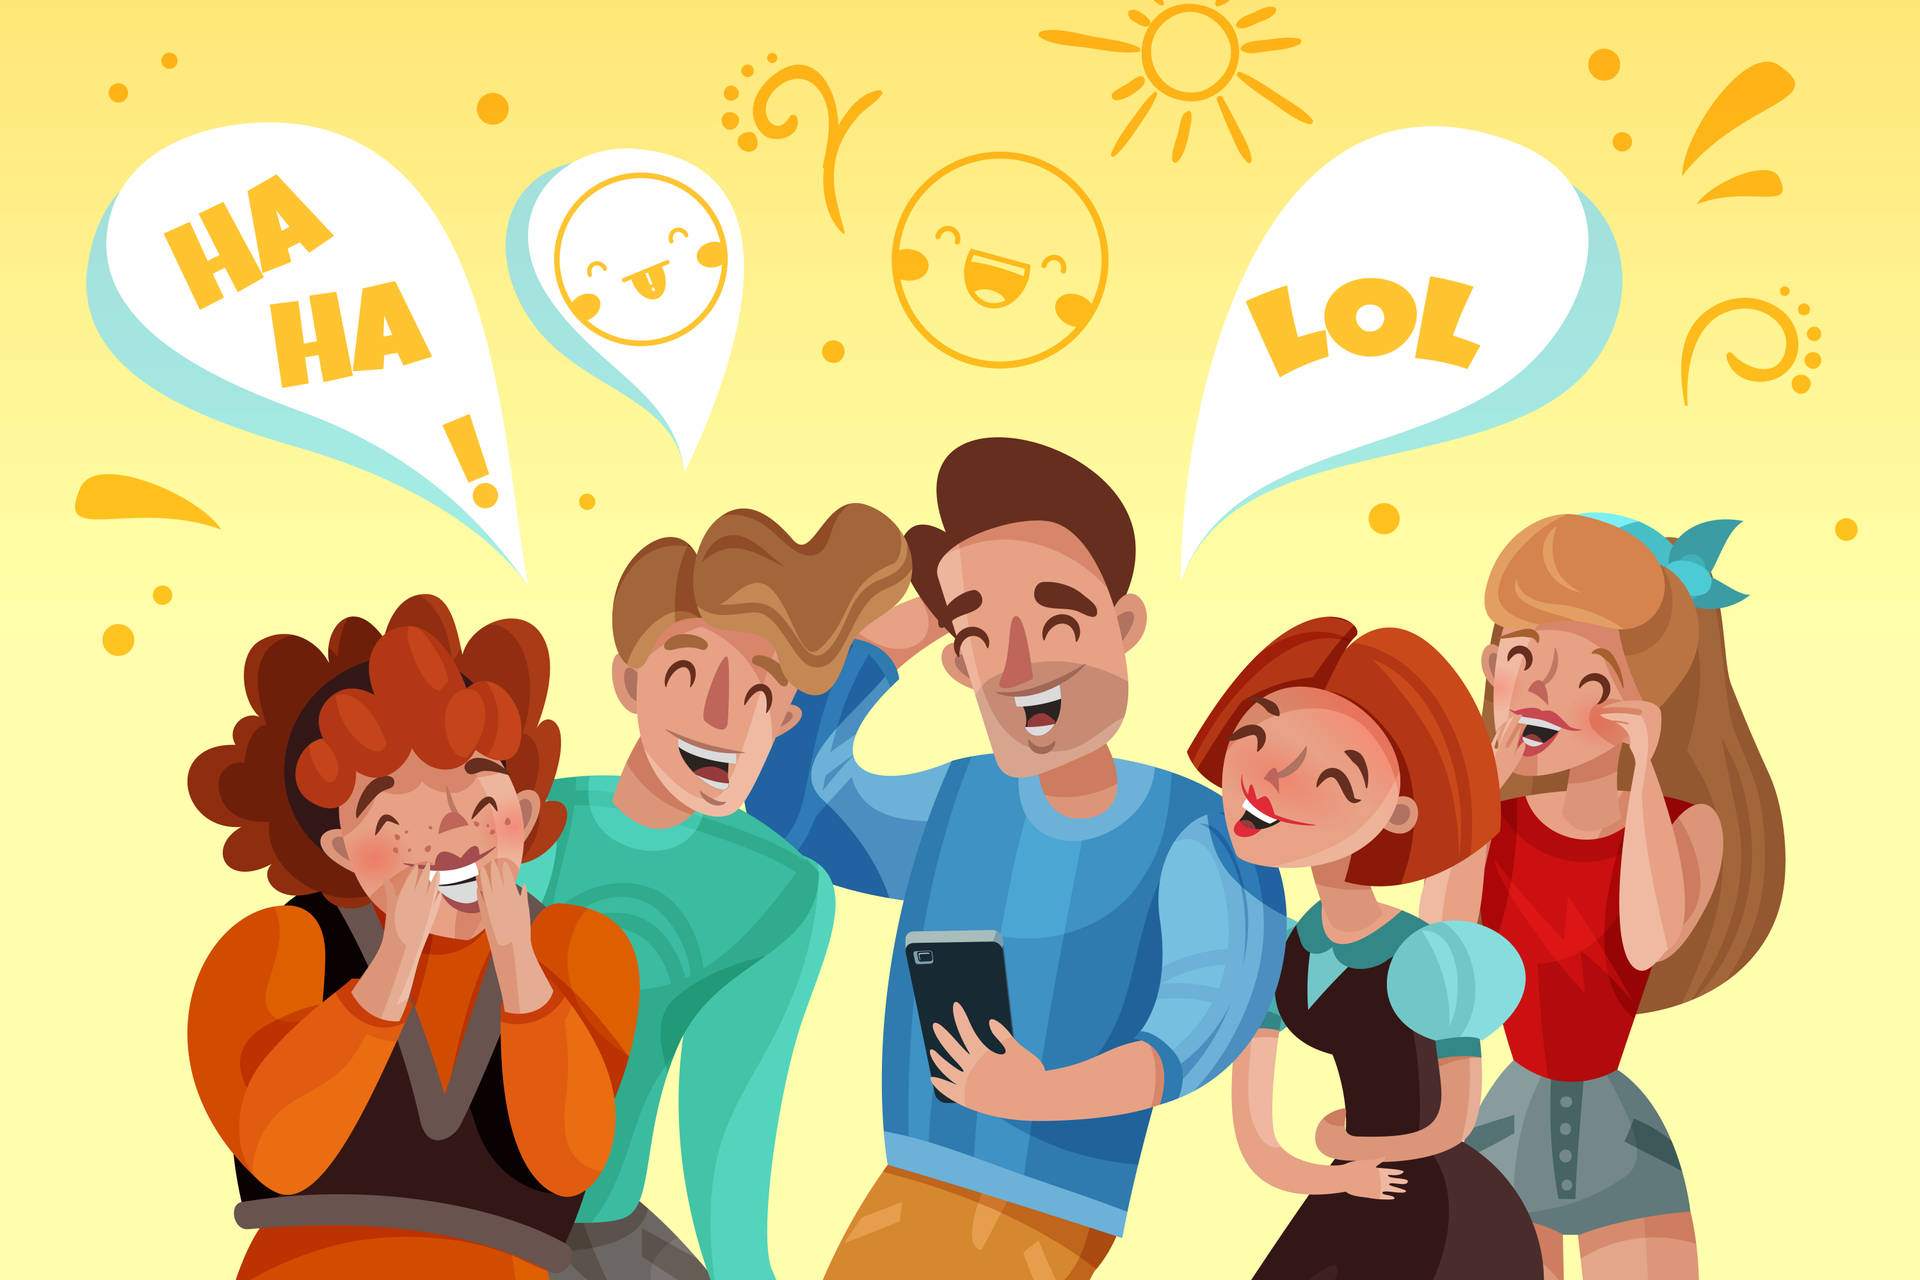 Animated Laughing People wallpaper.